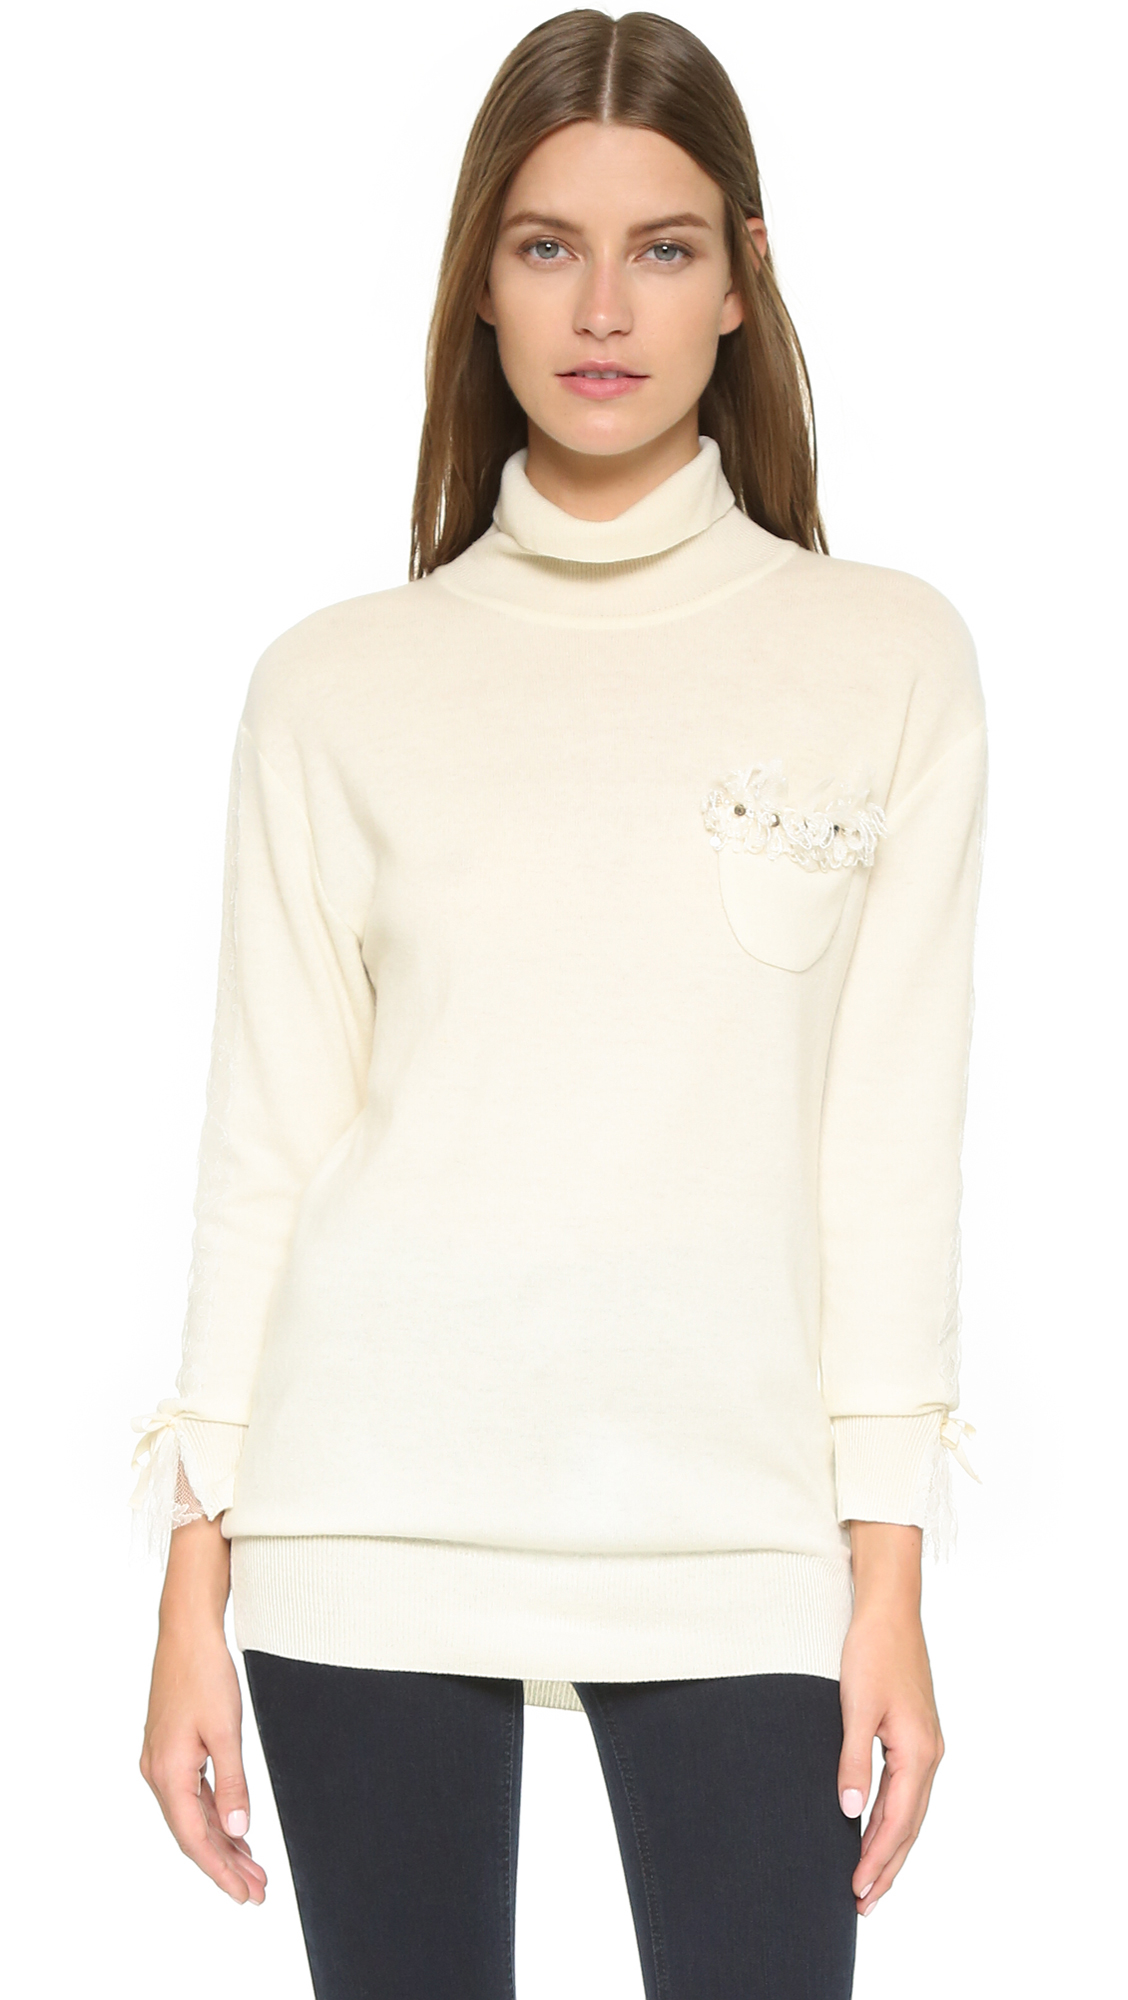 Lyst - Leur logette Lace Sleeve Turtleneck Sweater - Off White in White